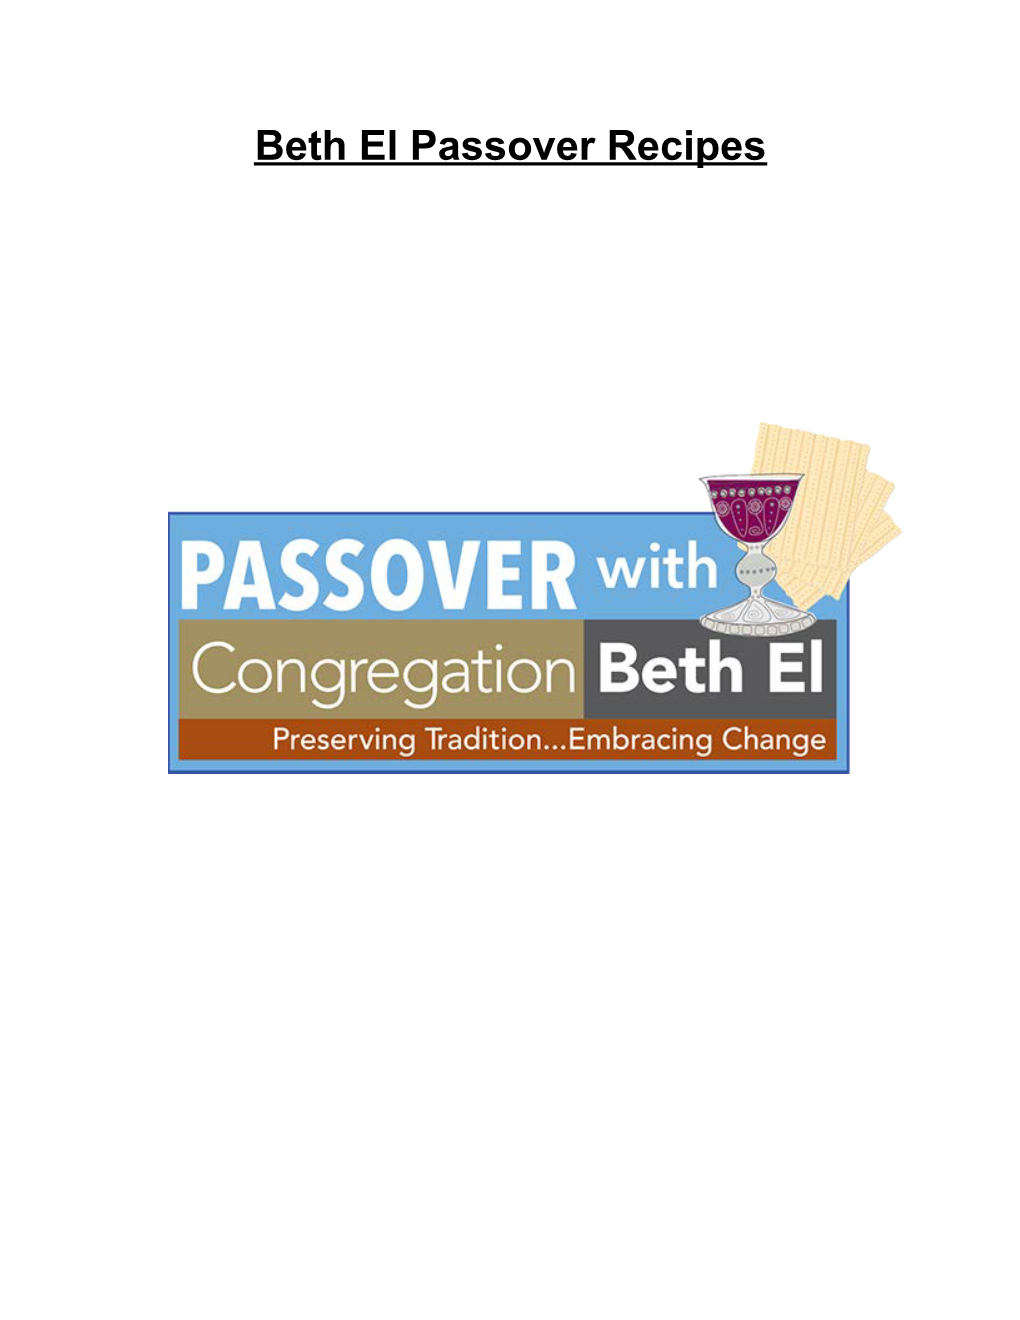 Passover Recipes TABLE of CONTENTS